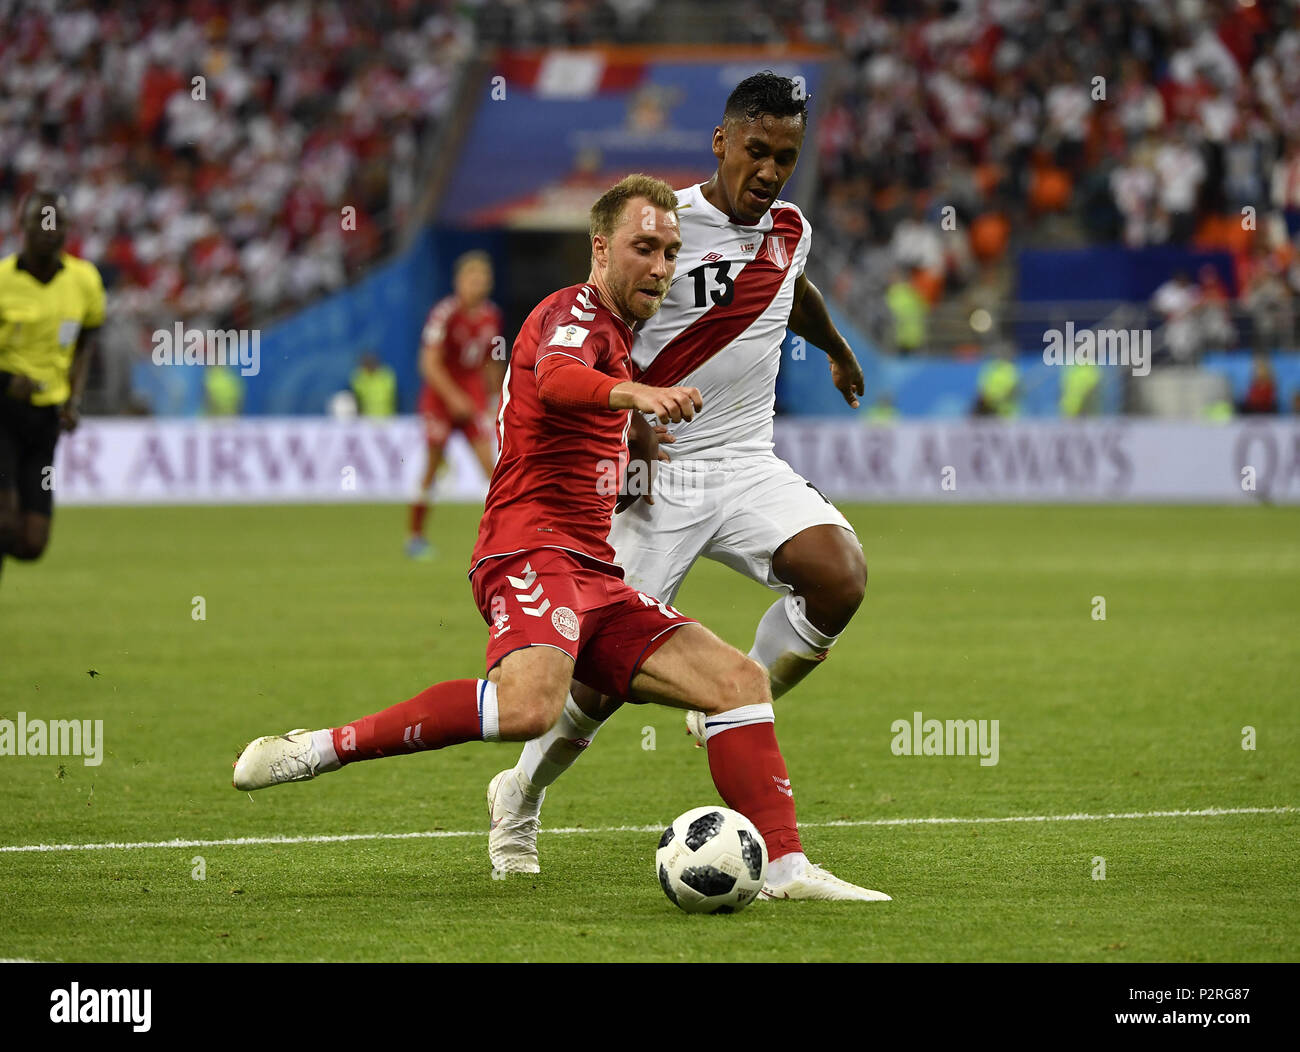 Saransk, Russia. 16th June, 2018. Christian Eriksen (L) of Denmark vies with Renato Tapia of Peru during a group C match between Peru and Denmark at the 2018 FIFA World Cup in Saransk, Russia, June 16, 2018. Credit: He Canling/Xinhua/Alamy Live News Stock Photo